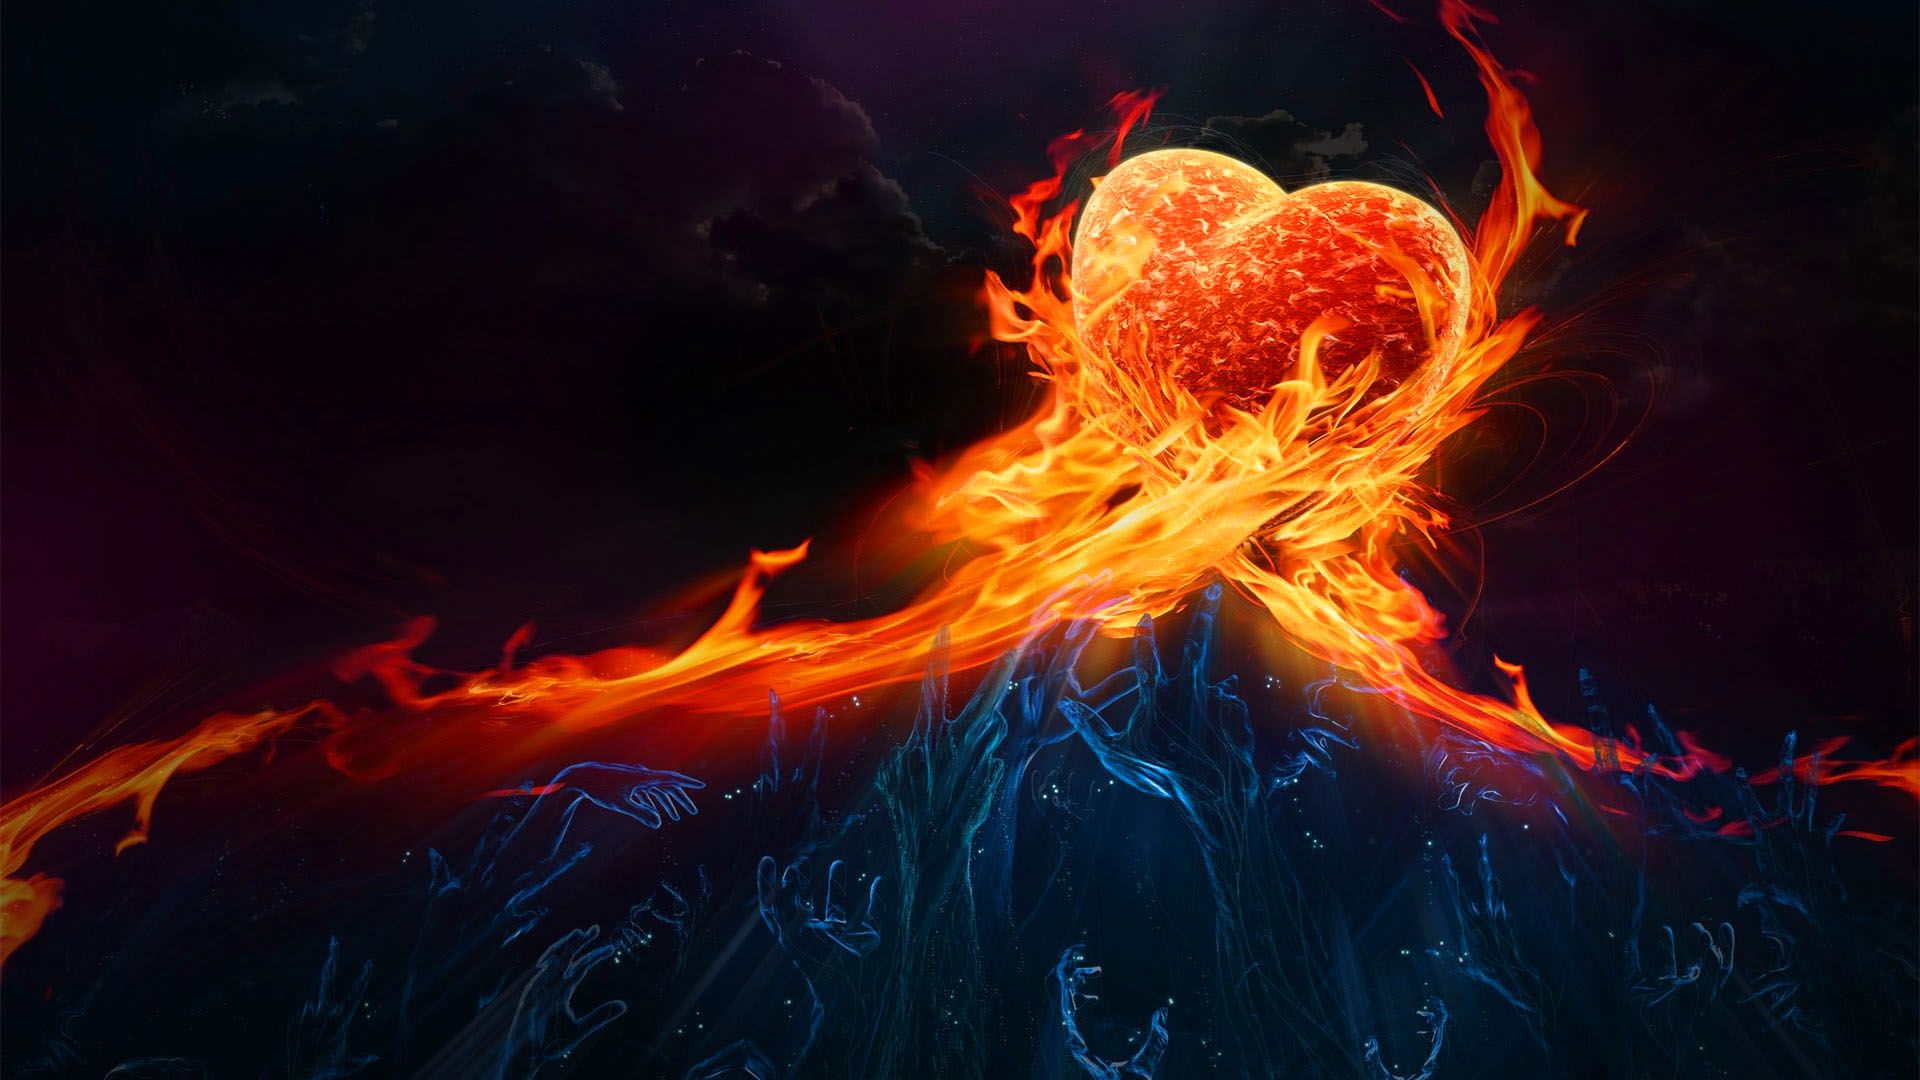 Ice And Fire Love Wallpapers